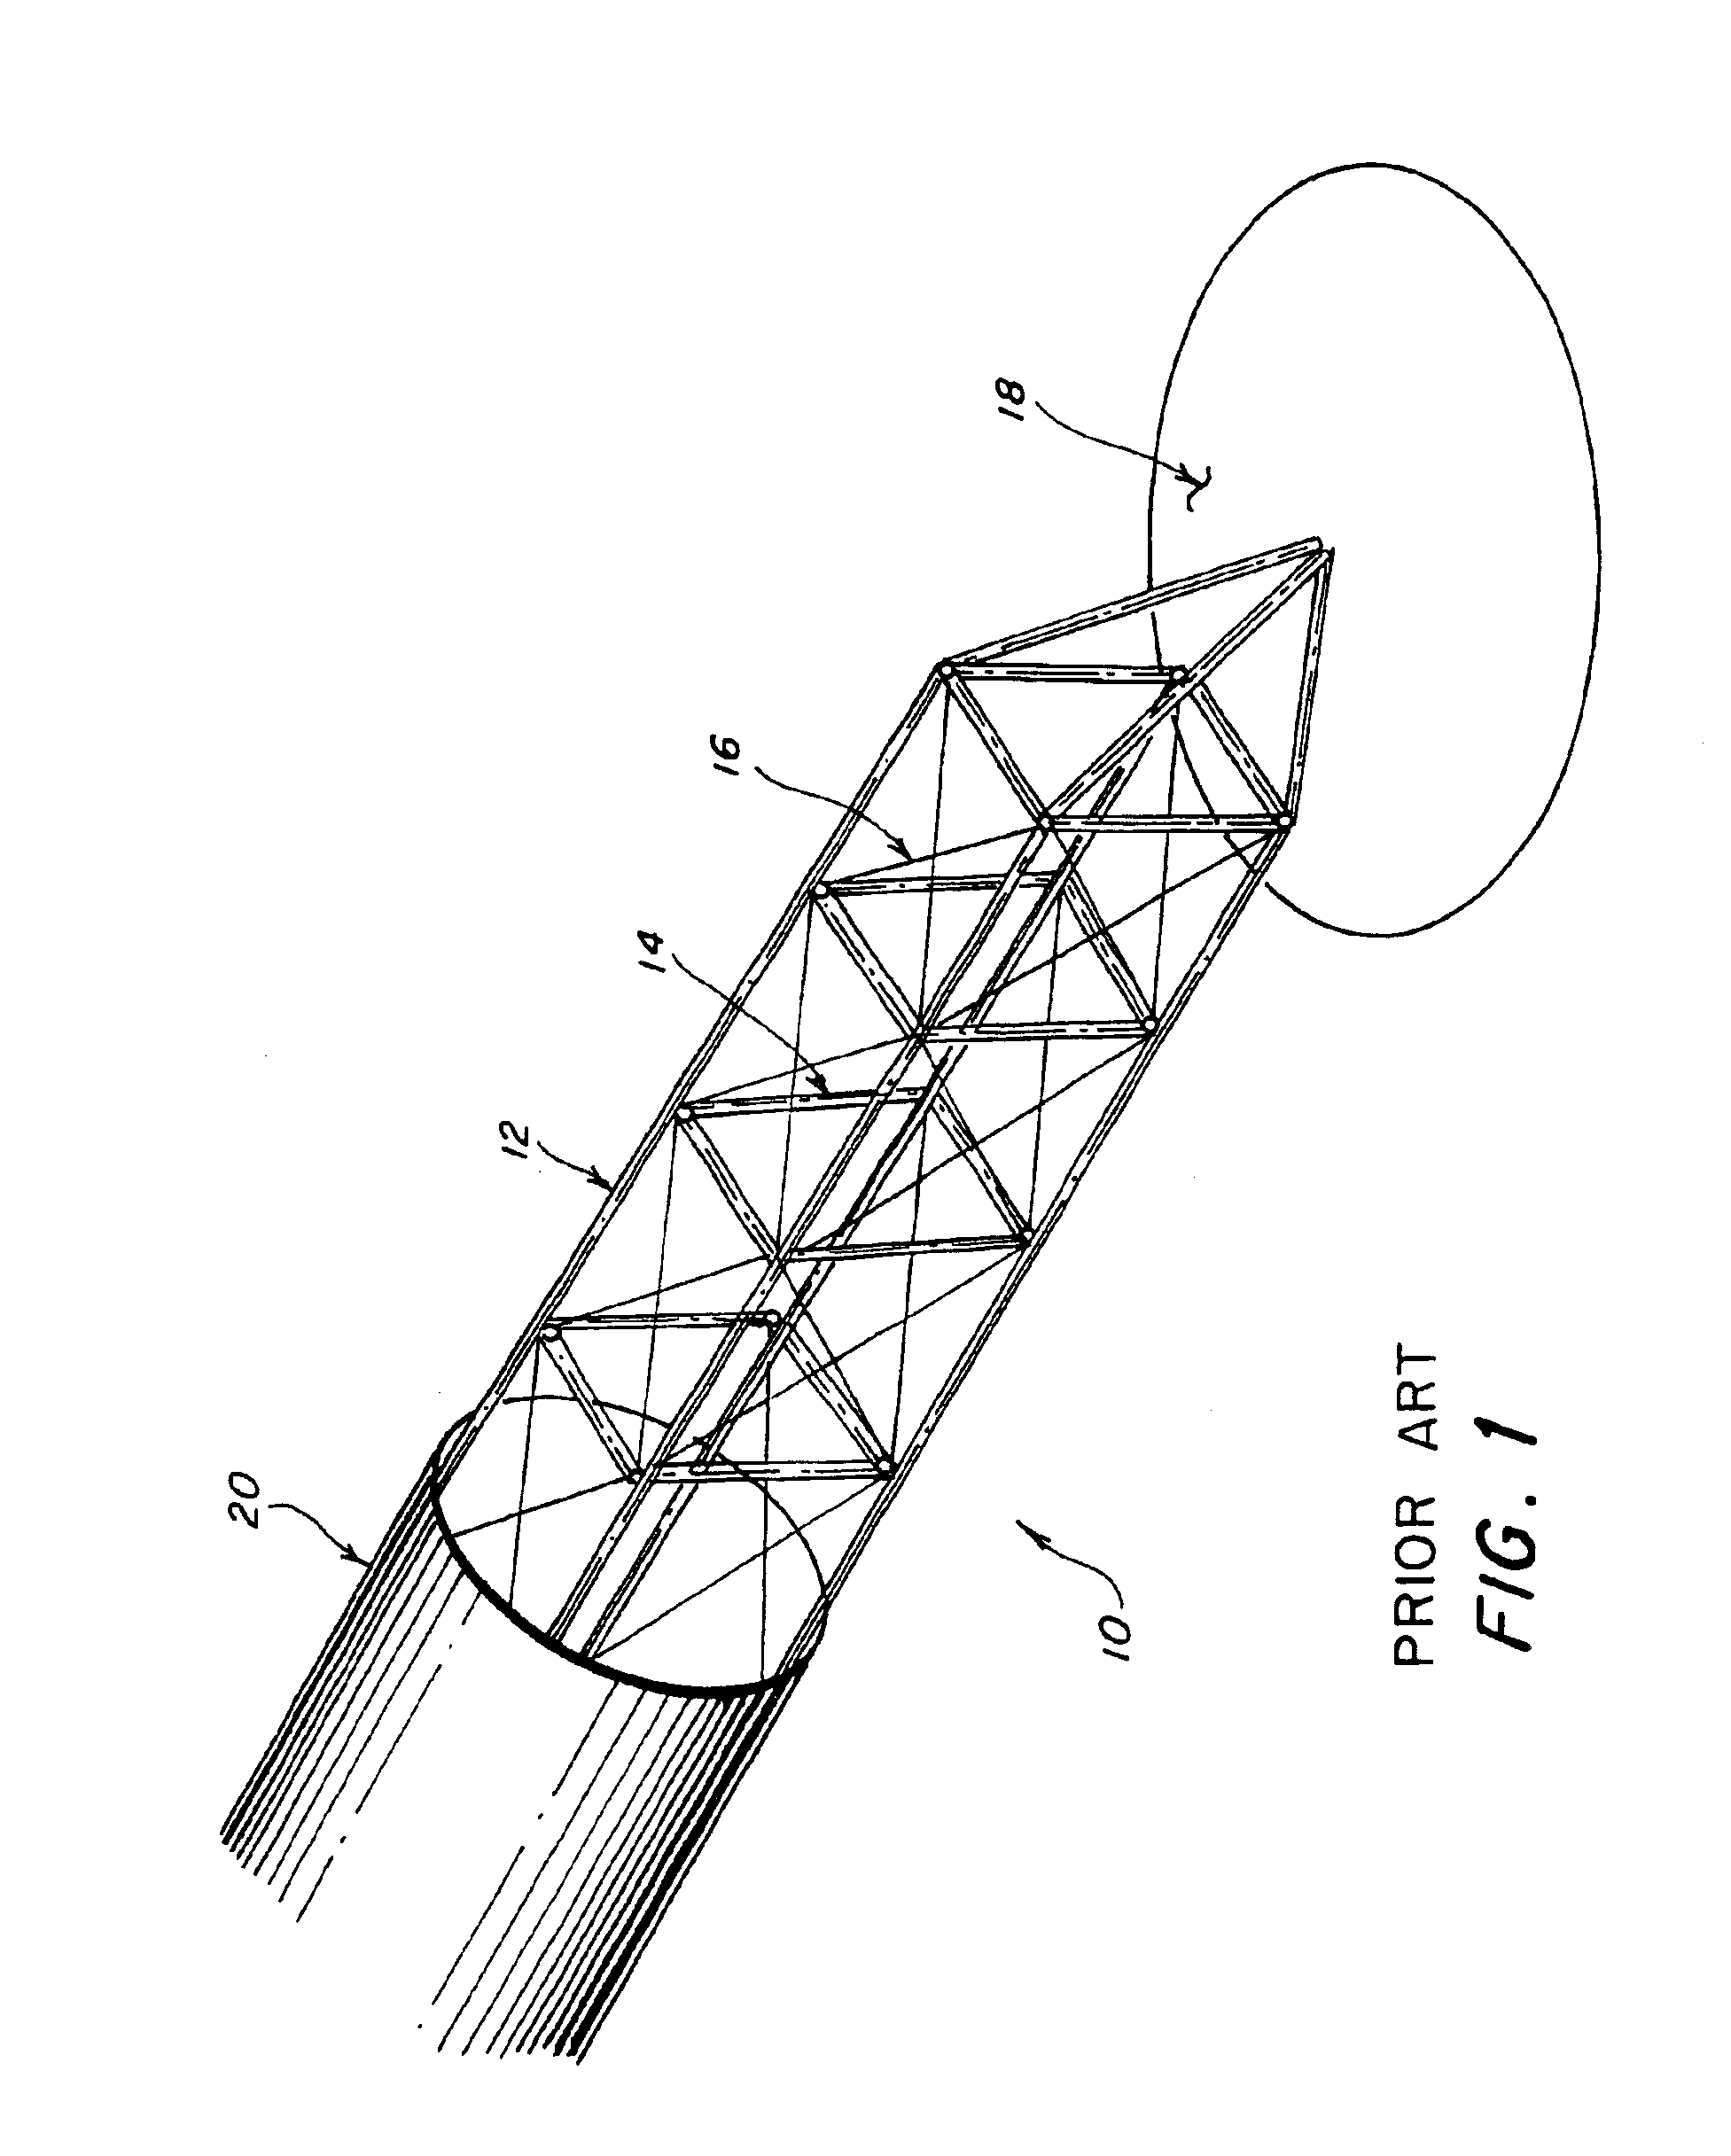 Elongated truss boom structures for space applications